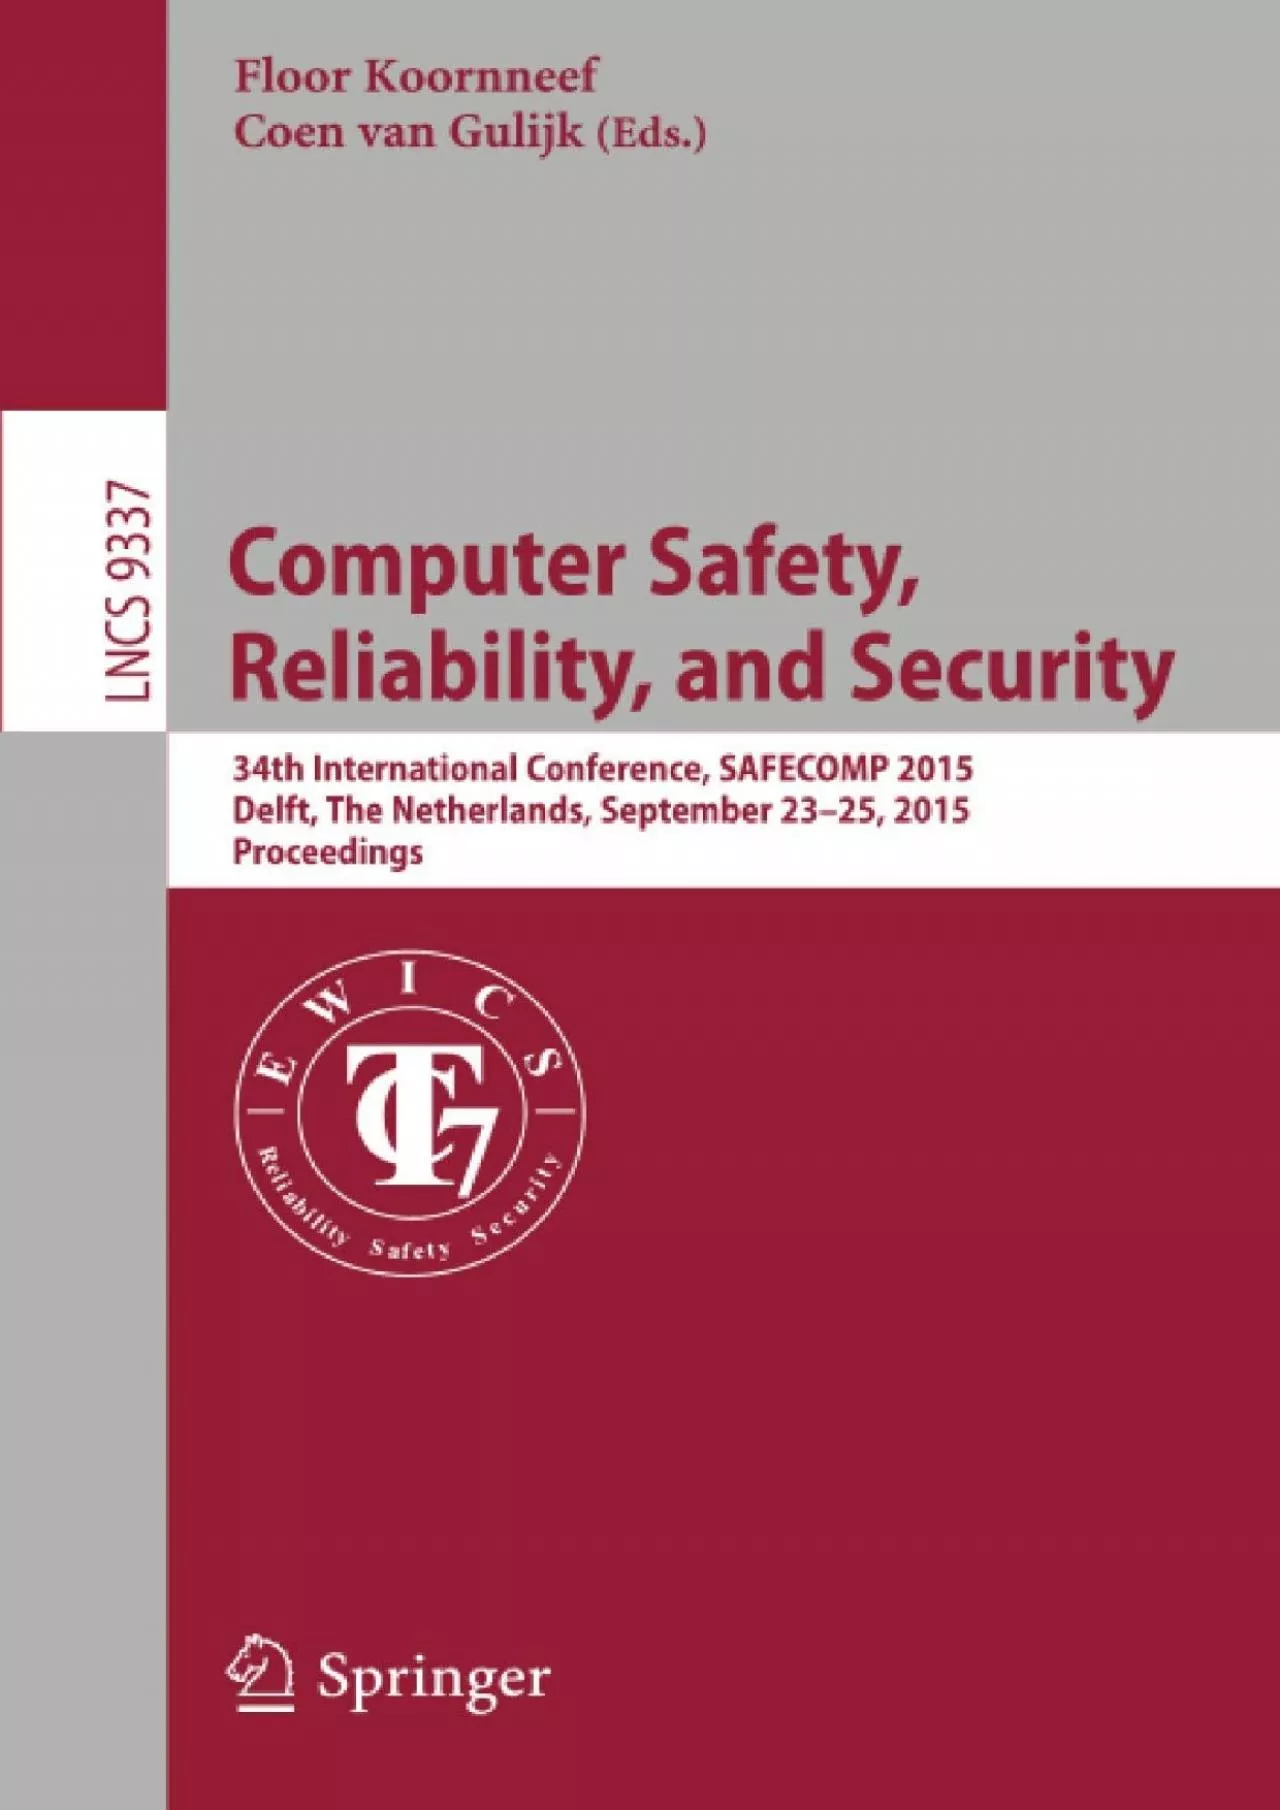 [PDF]-Computer Safety, Reliability, and Security: 34th International Conference, SAFECOMP